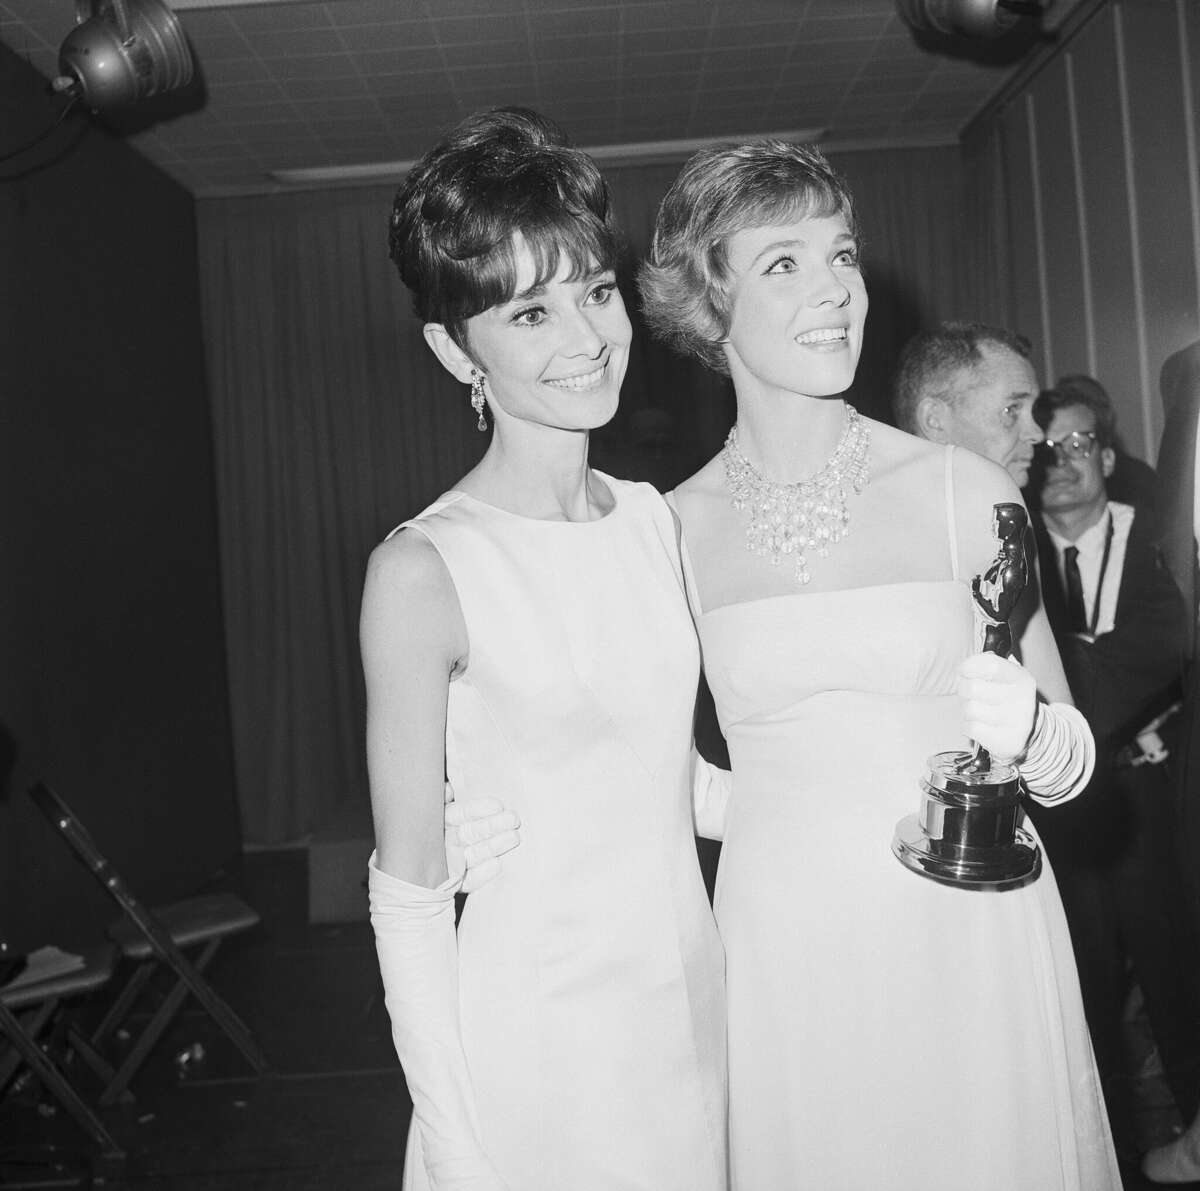 Julie Andrews was passed over, in favor of Audrey Hepburn, for the role of Eliza Dolittle in My Fair Lady, which she originated on stage. This freed her to play the title role in Mary Poppins, for which she won the Academy Award for Best Actress; Hepburn was not even nominated. Here the two of them stand after Andrews received her Oscar. 1965.